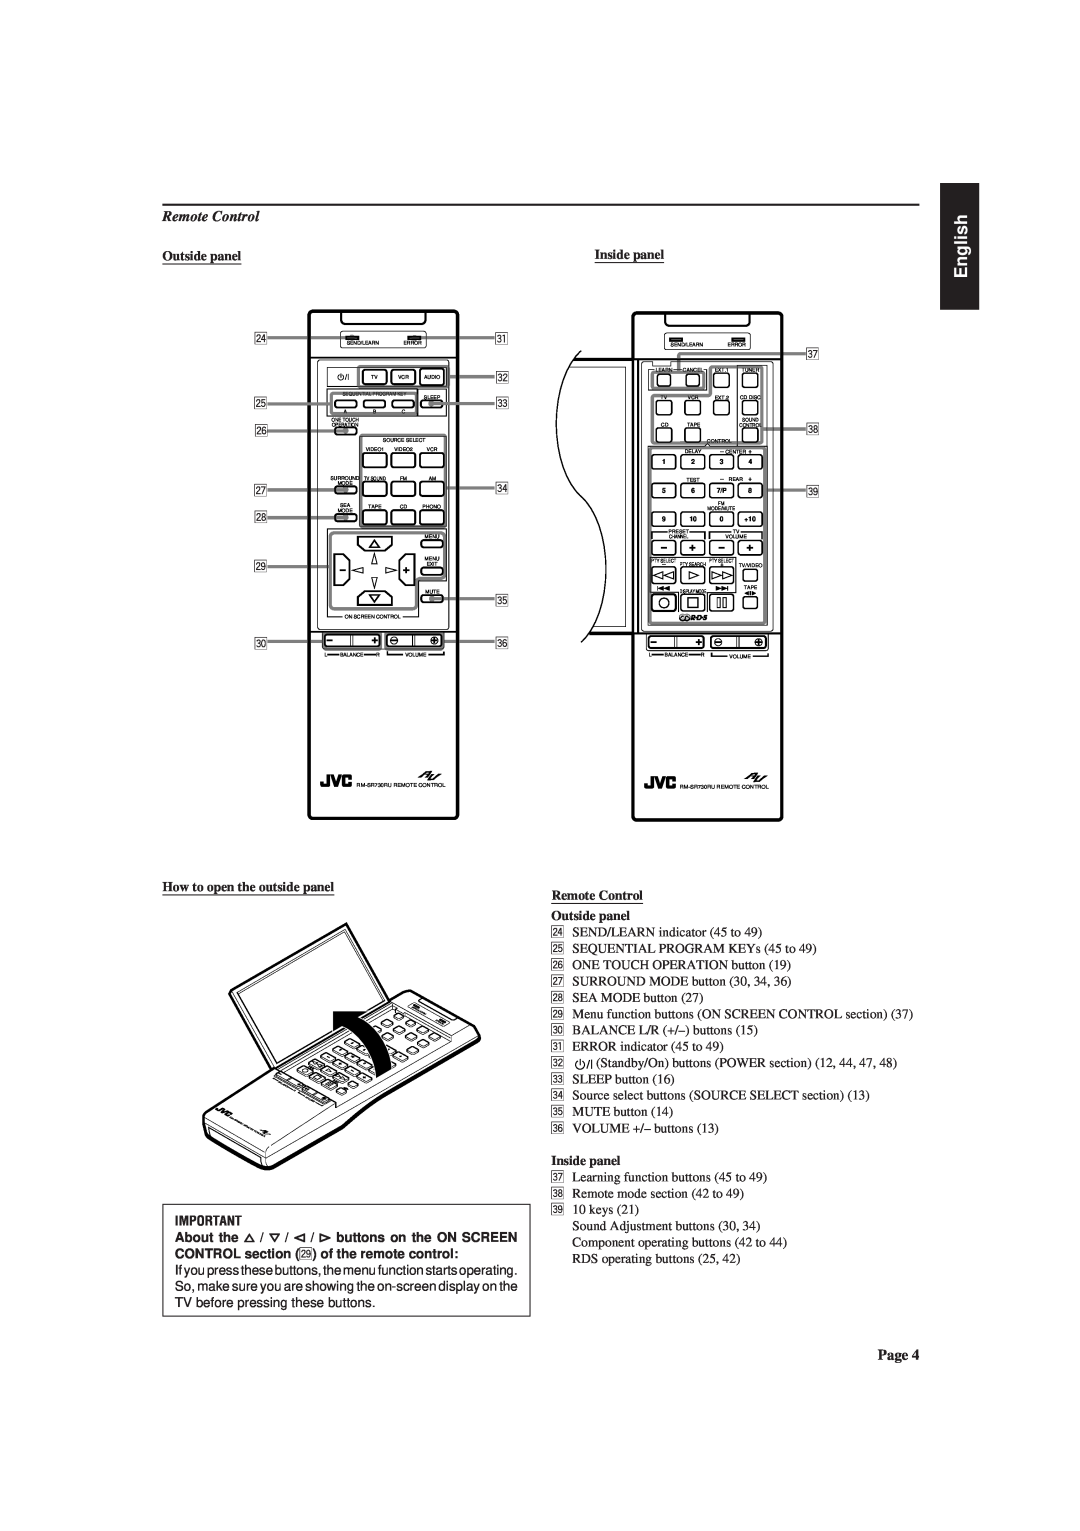 JVC RX-730RBK manual English, How to open the outside panel, Remote Control Outside panel, Inside panel 